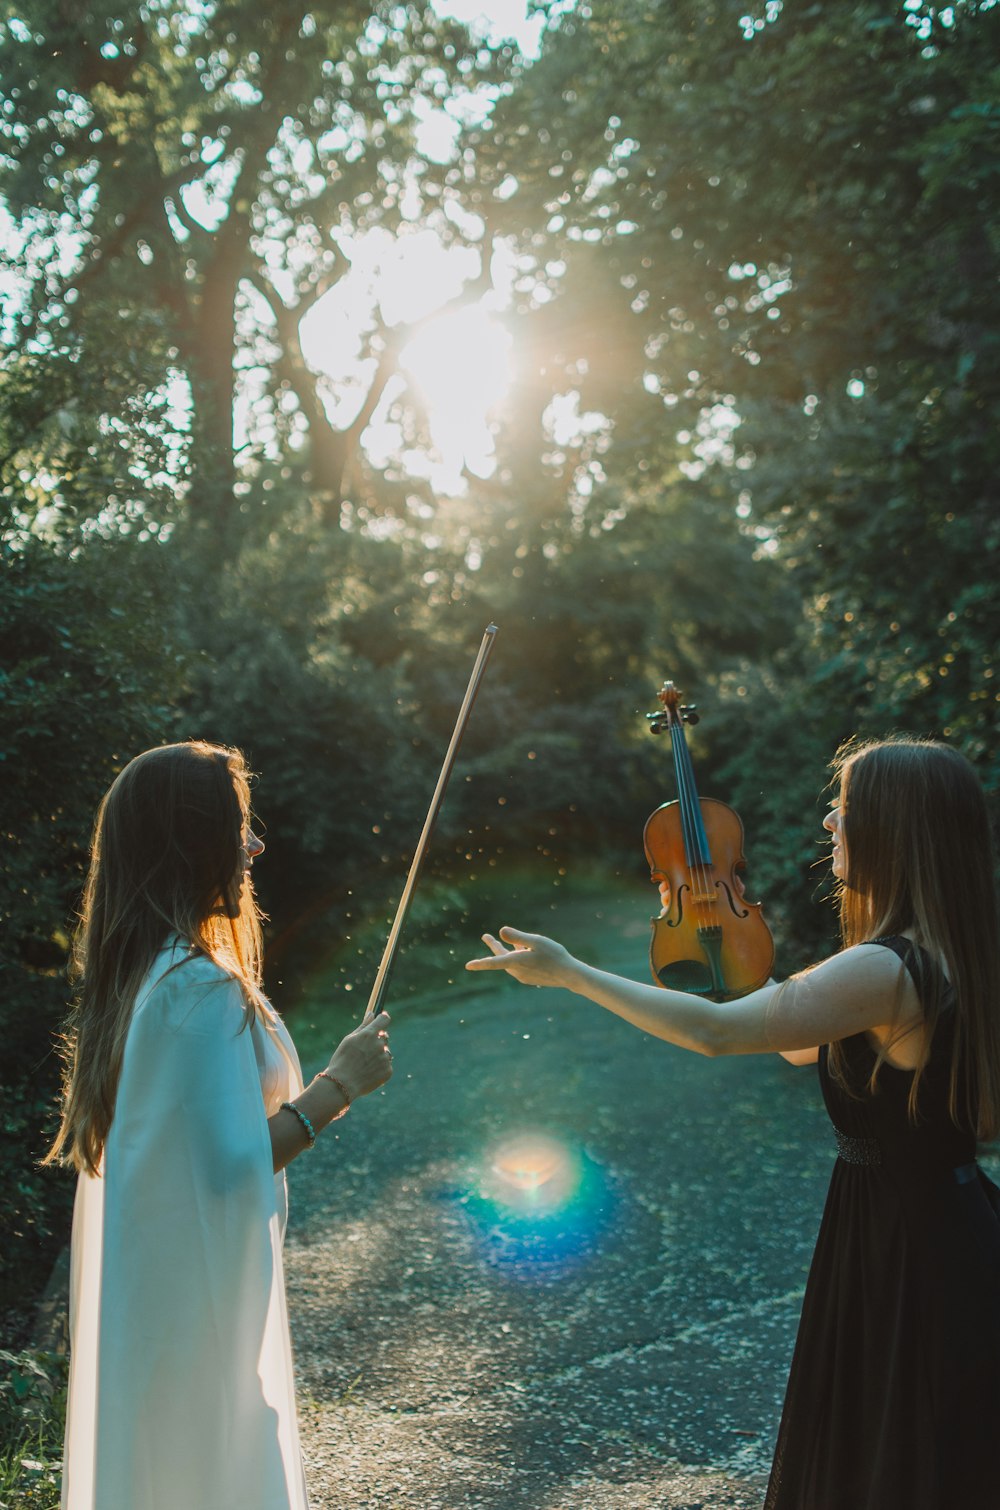 a person playing a violin next to a person in a white dress